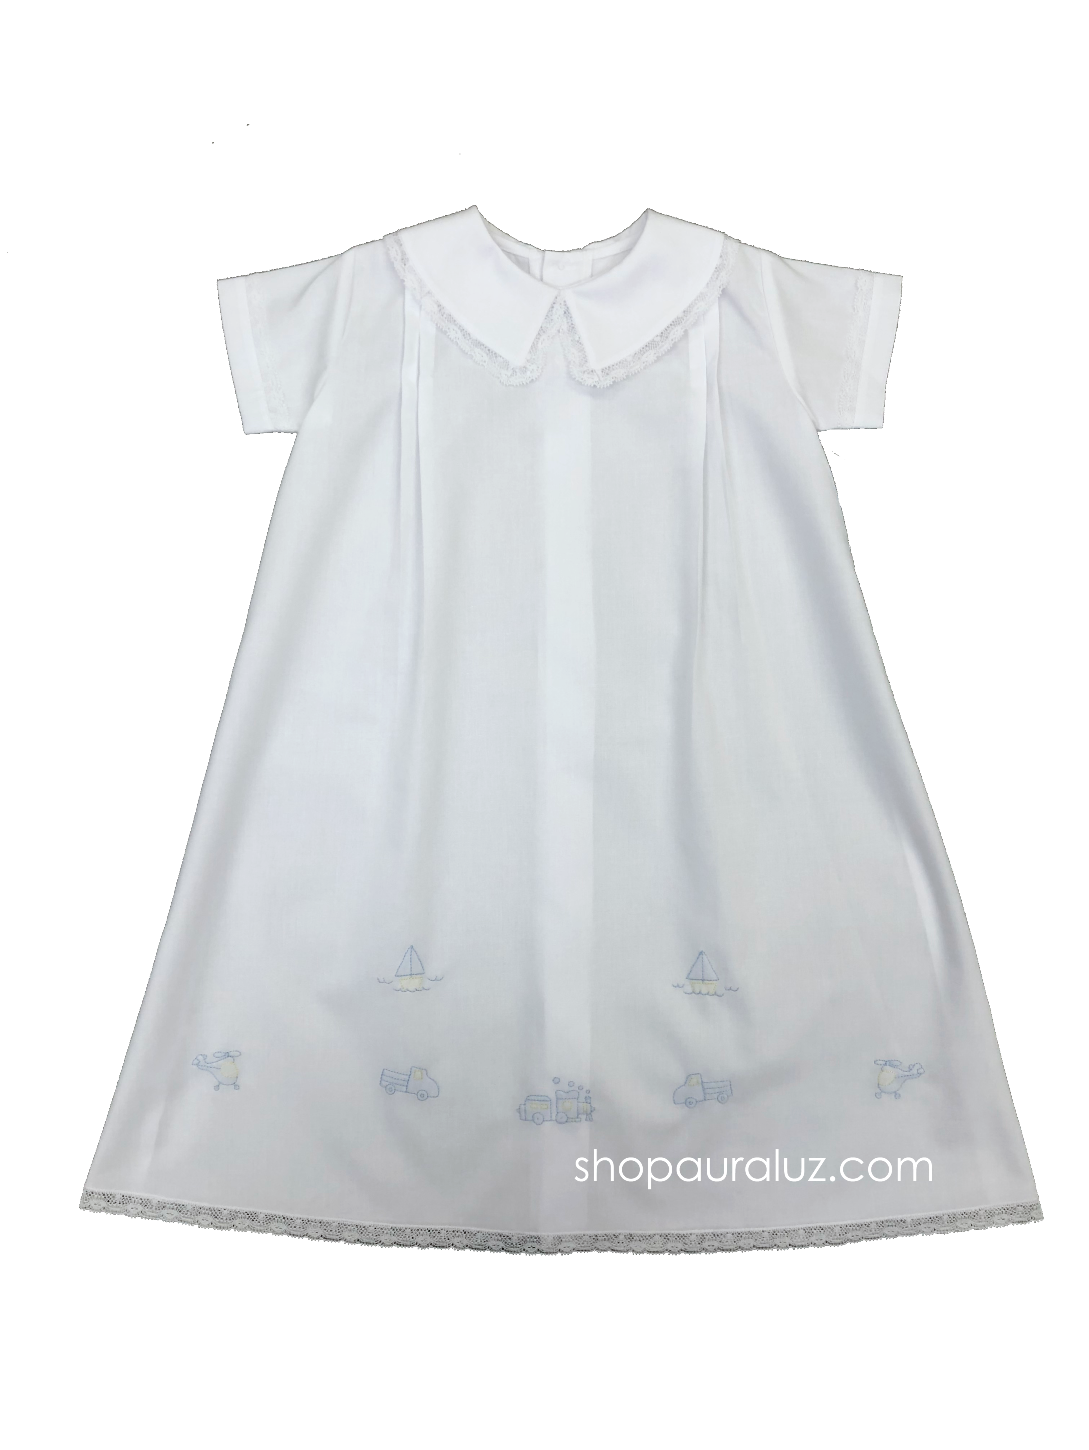 Auraluz Boy Day Gown..White with white lace and embroidered assorted transportation